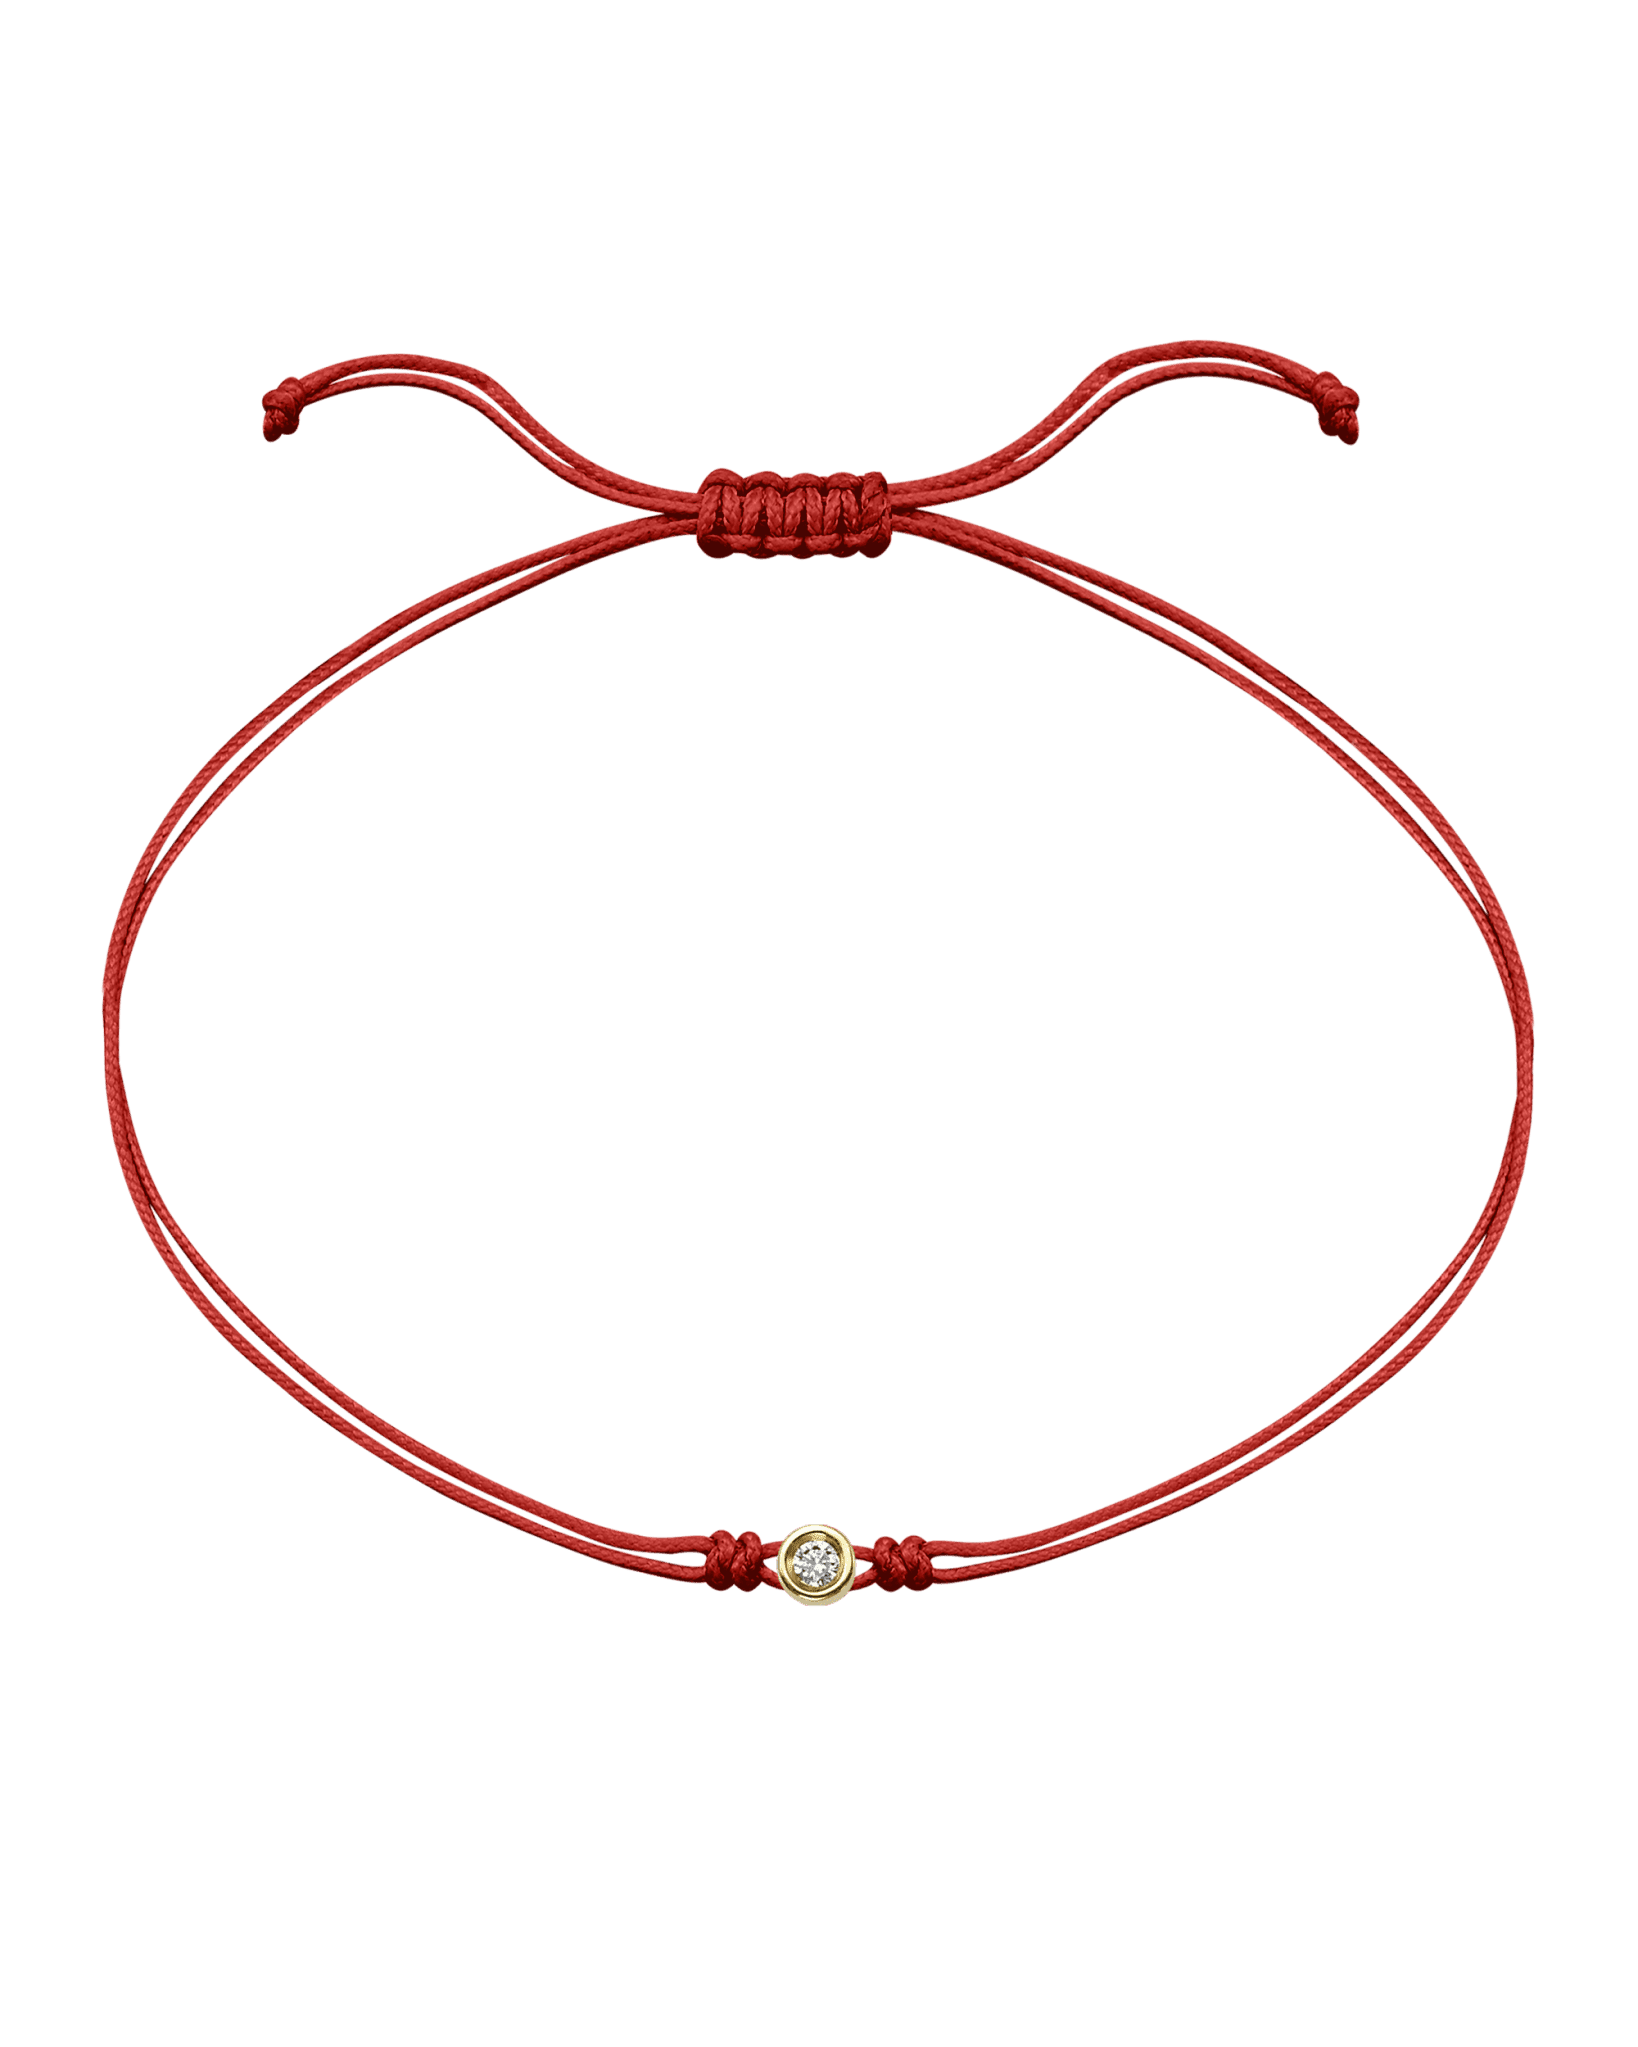 Le String of Love - Or Jaune 14 carats Bracelets magal-dev Rouge Small: 0.03 carats 